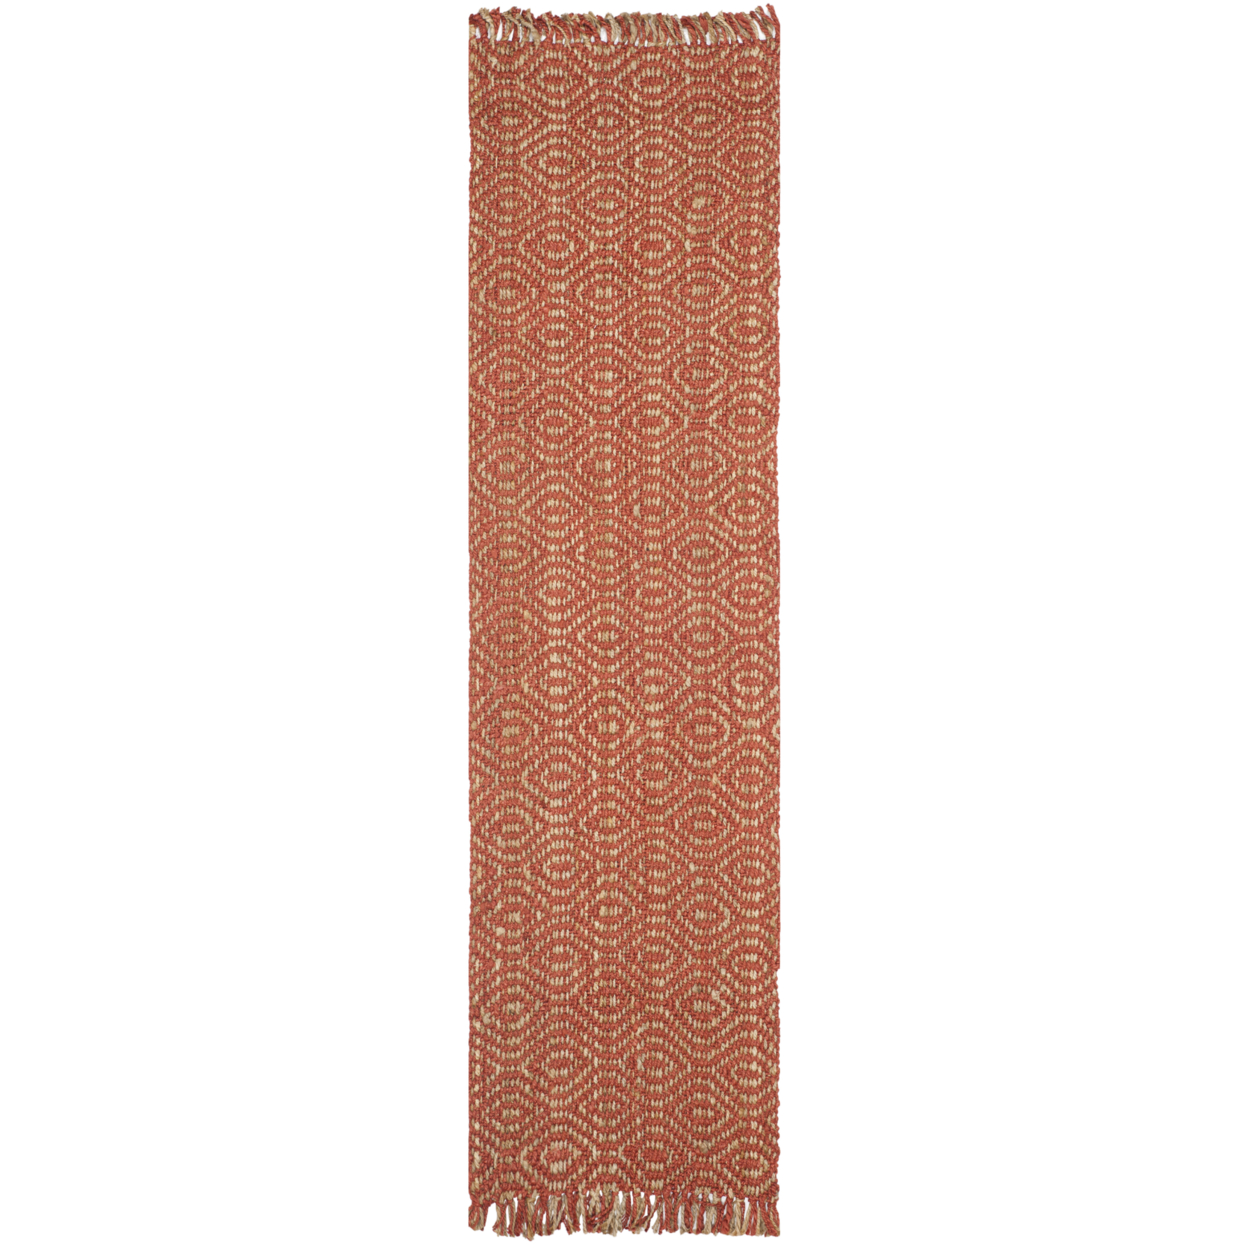 SAFAVIEH Natural Fiber NF445A Handwoven Rust Rug - 9' Square